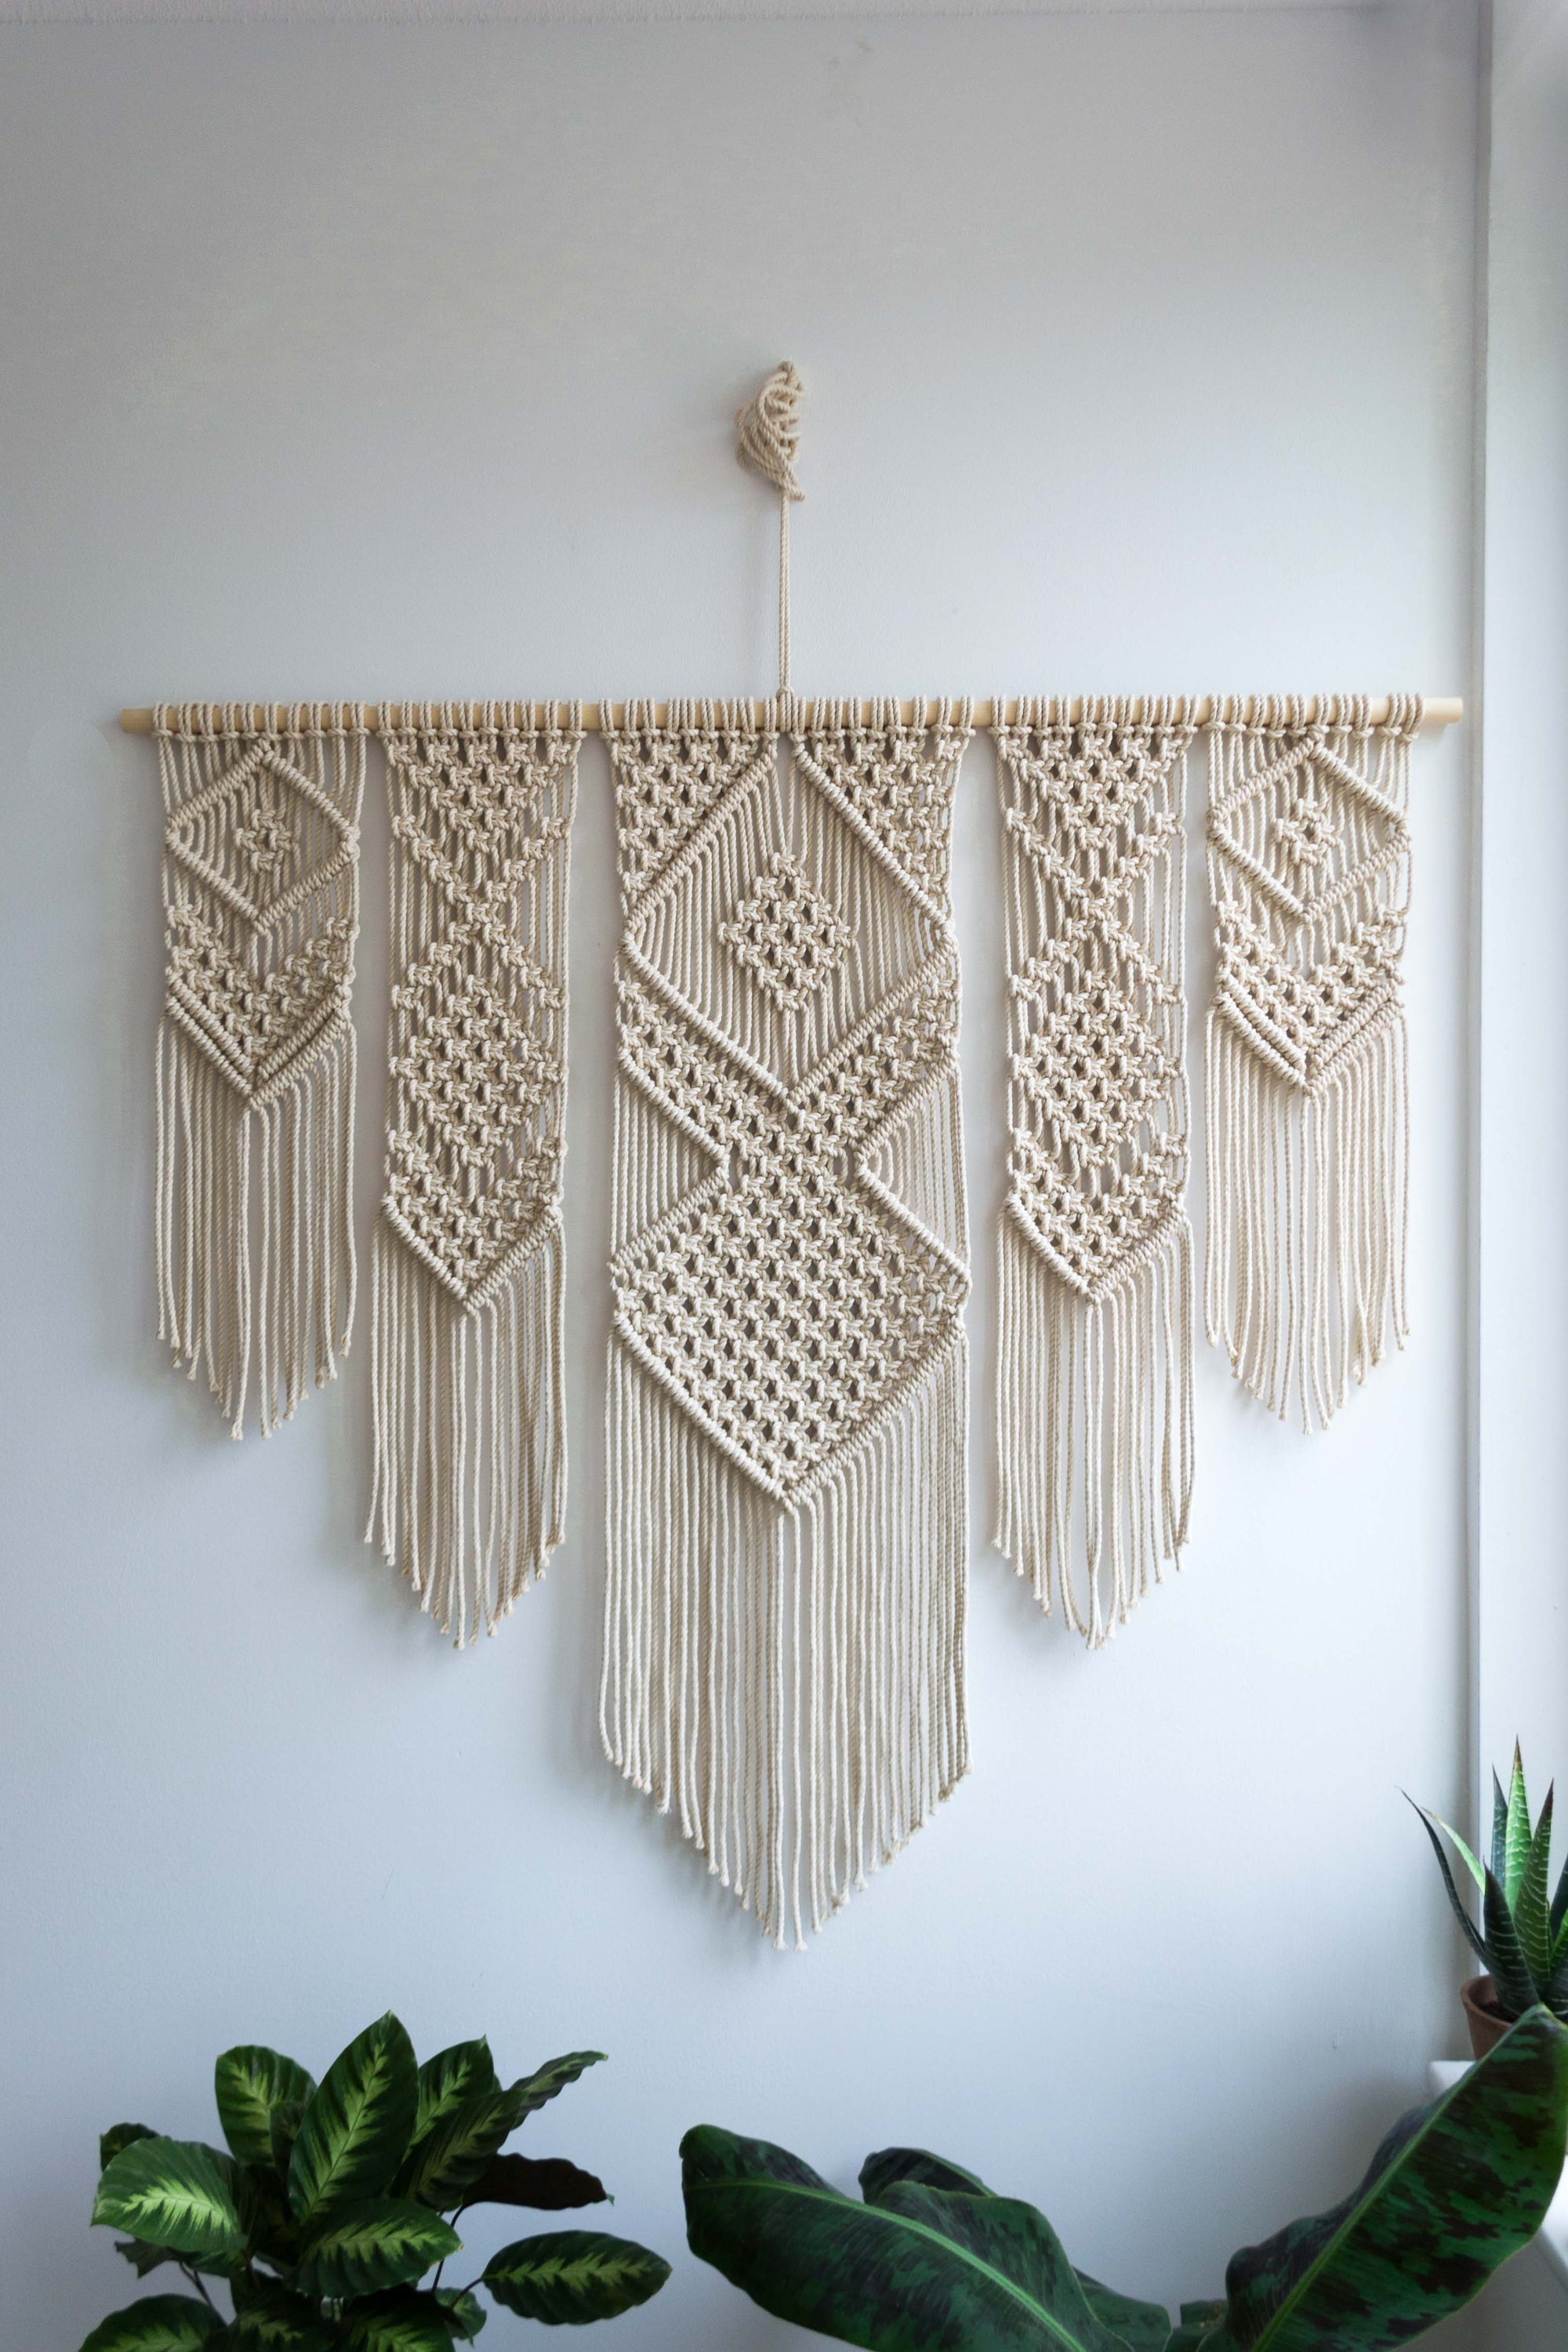 Macrame Wall Hanging / 116cm x 100cm (46" x 40") / White, Grey, Navy Blue, Mustard, Wheat and Lavender